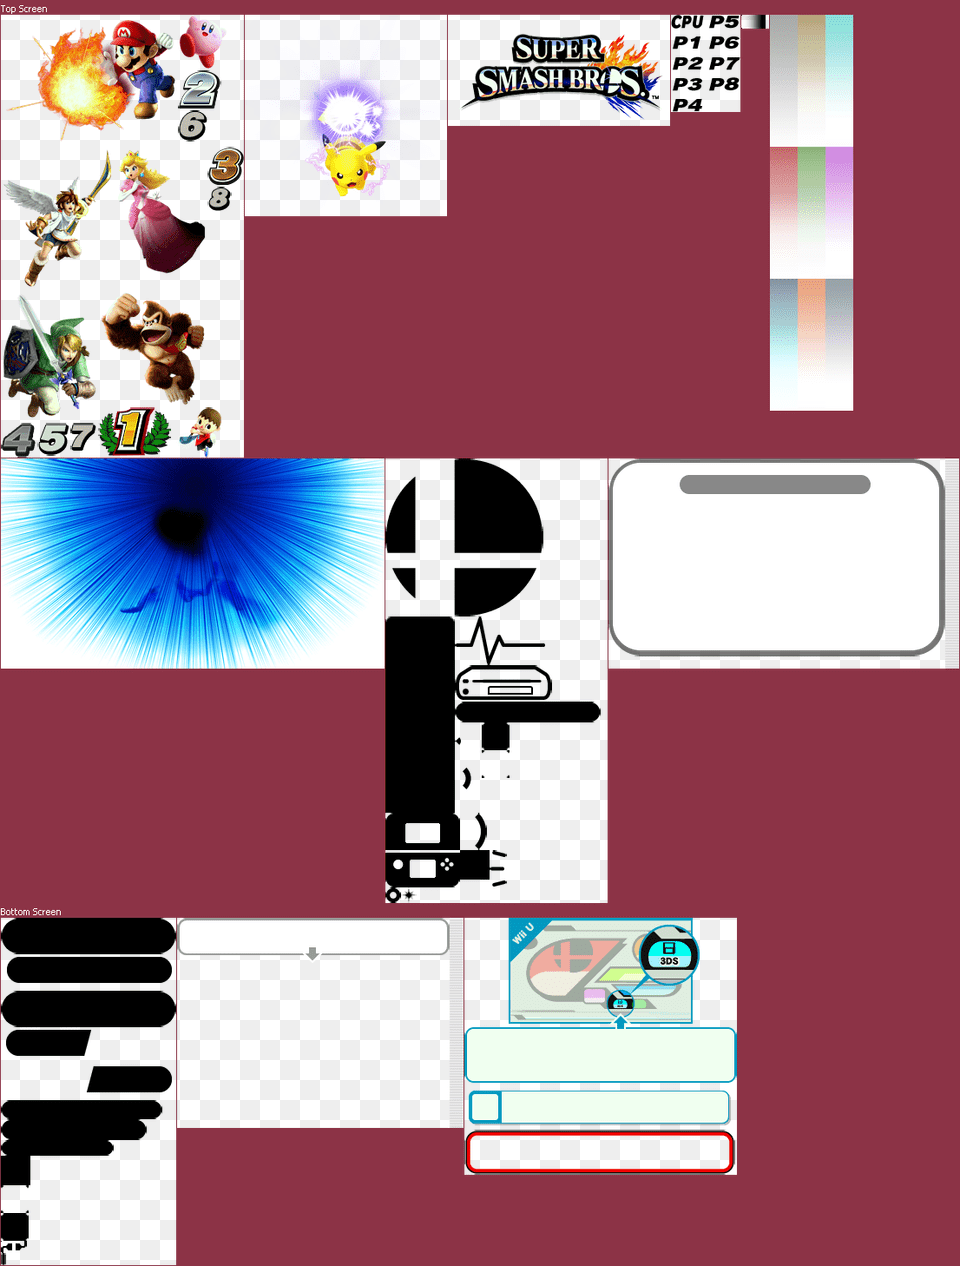 Click For Full Sized Image Wii U Link Up Super Smash Bros For Nintendo 3ds And Wii U, Person, Head, Art, Collage Free Png